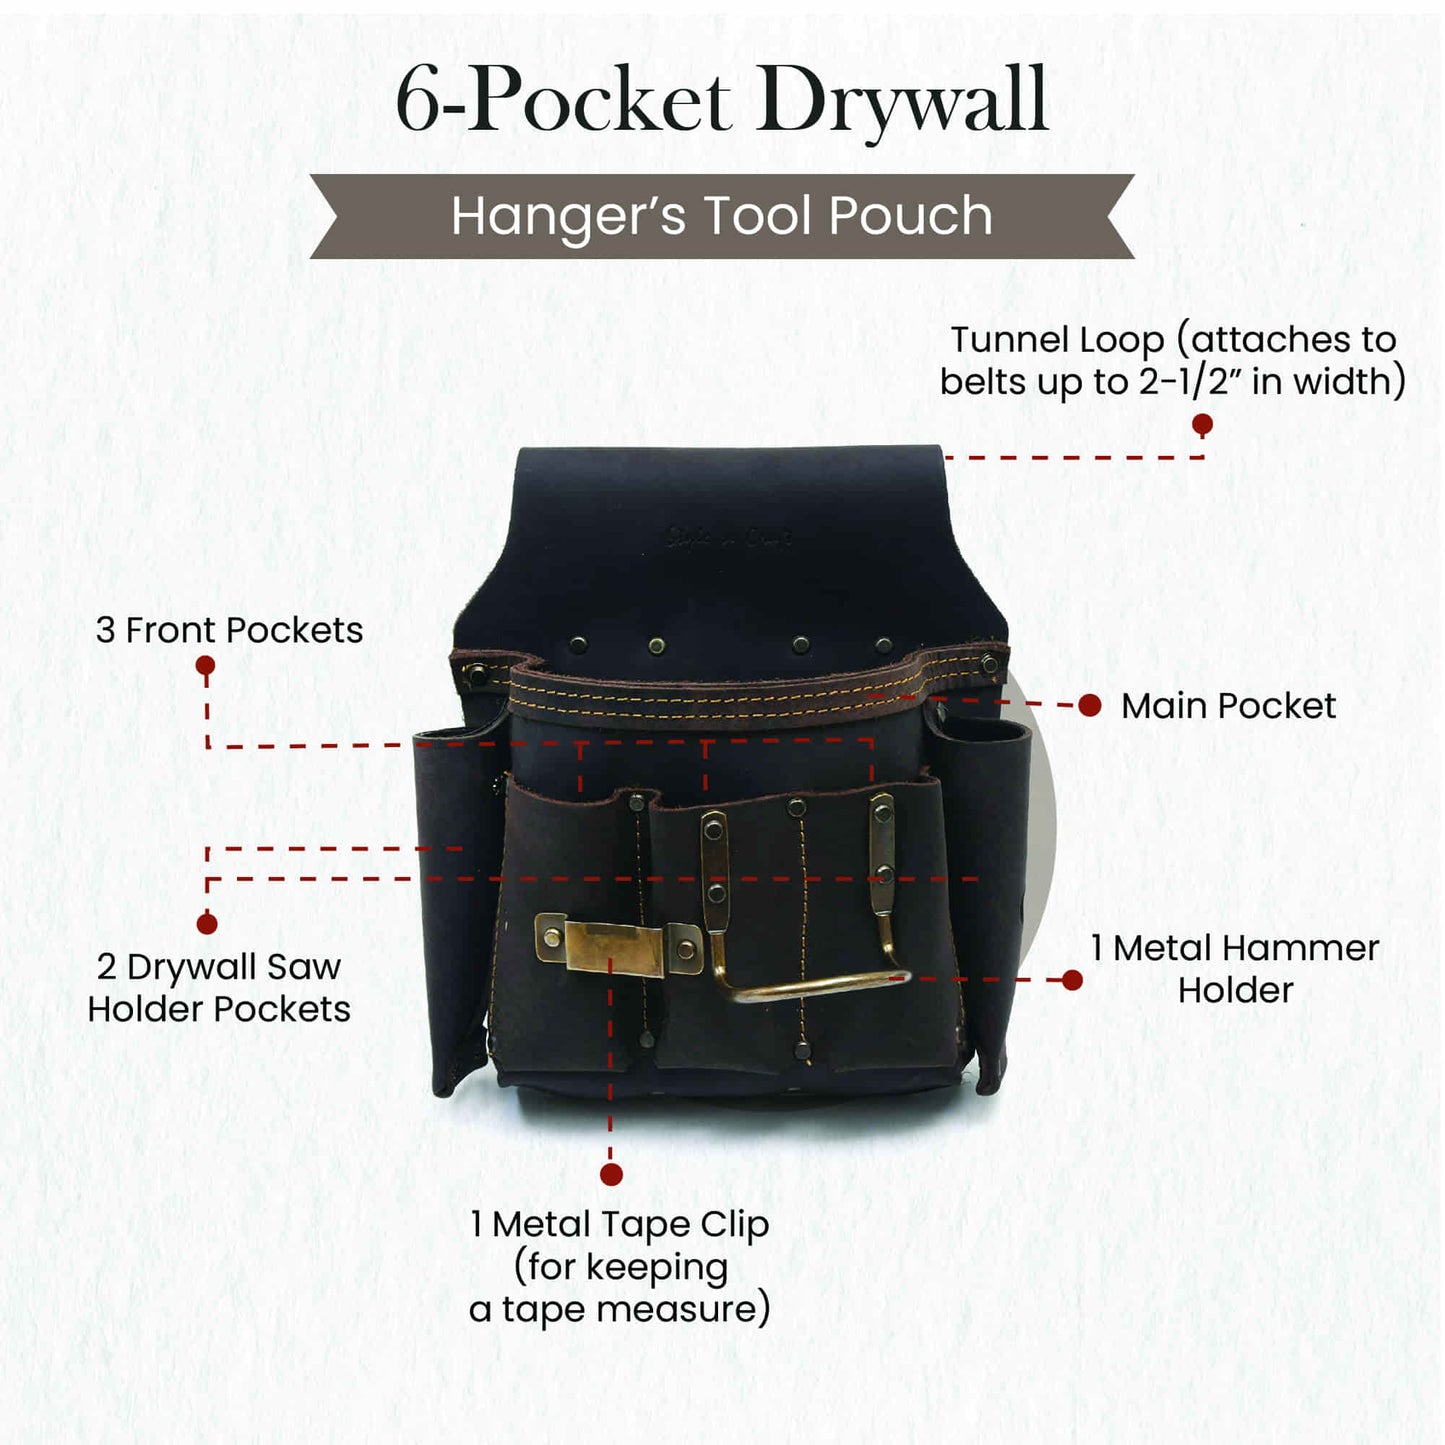 Style n Craft 70685 - 6 Pocket Drywall Hanger's Tool Pouch in Top Grain Oiled Leather with a Drywall Saw Holder on Each Side for Both Left & Right Handed Users - Front View Showing the Details